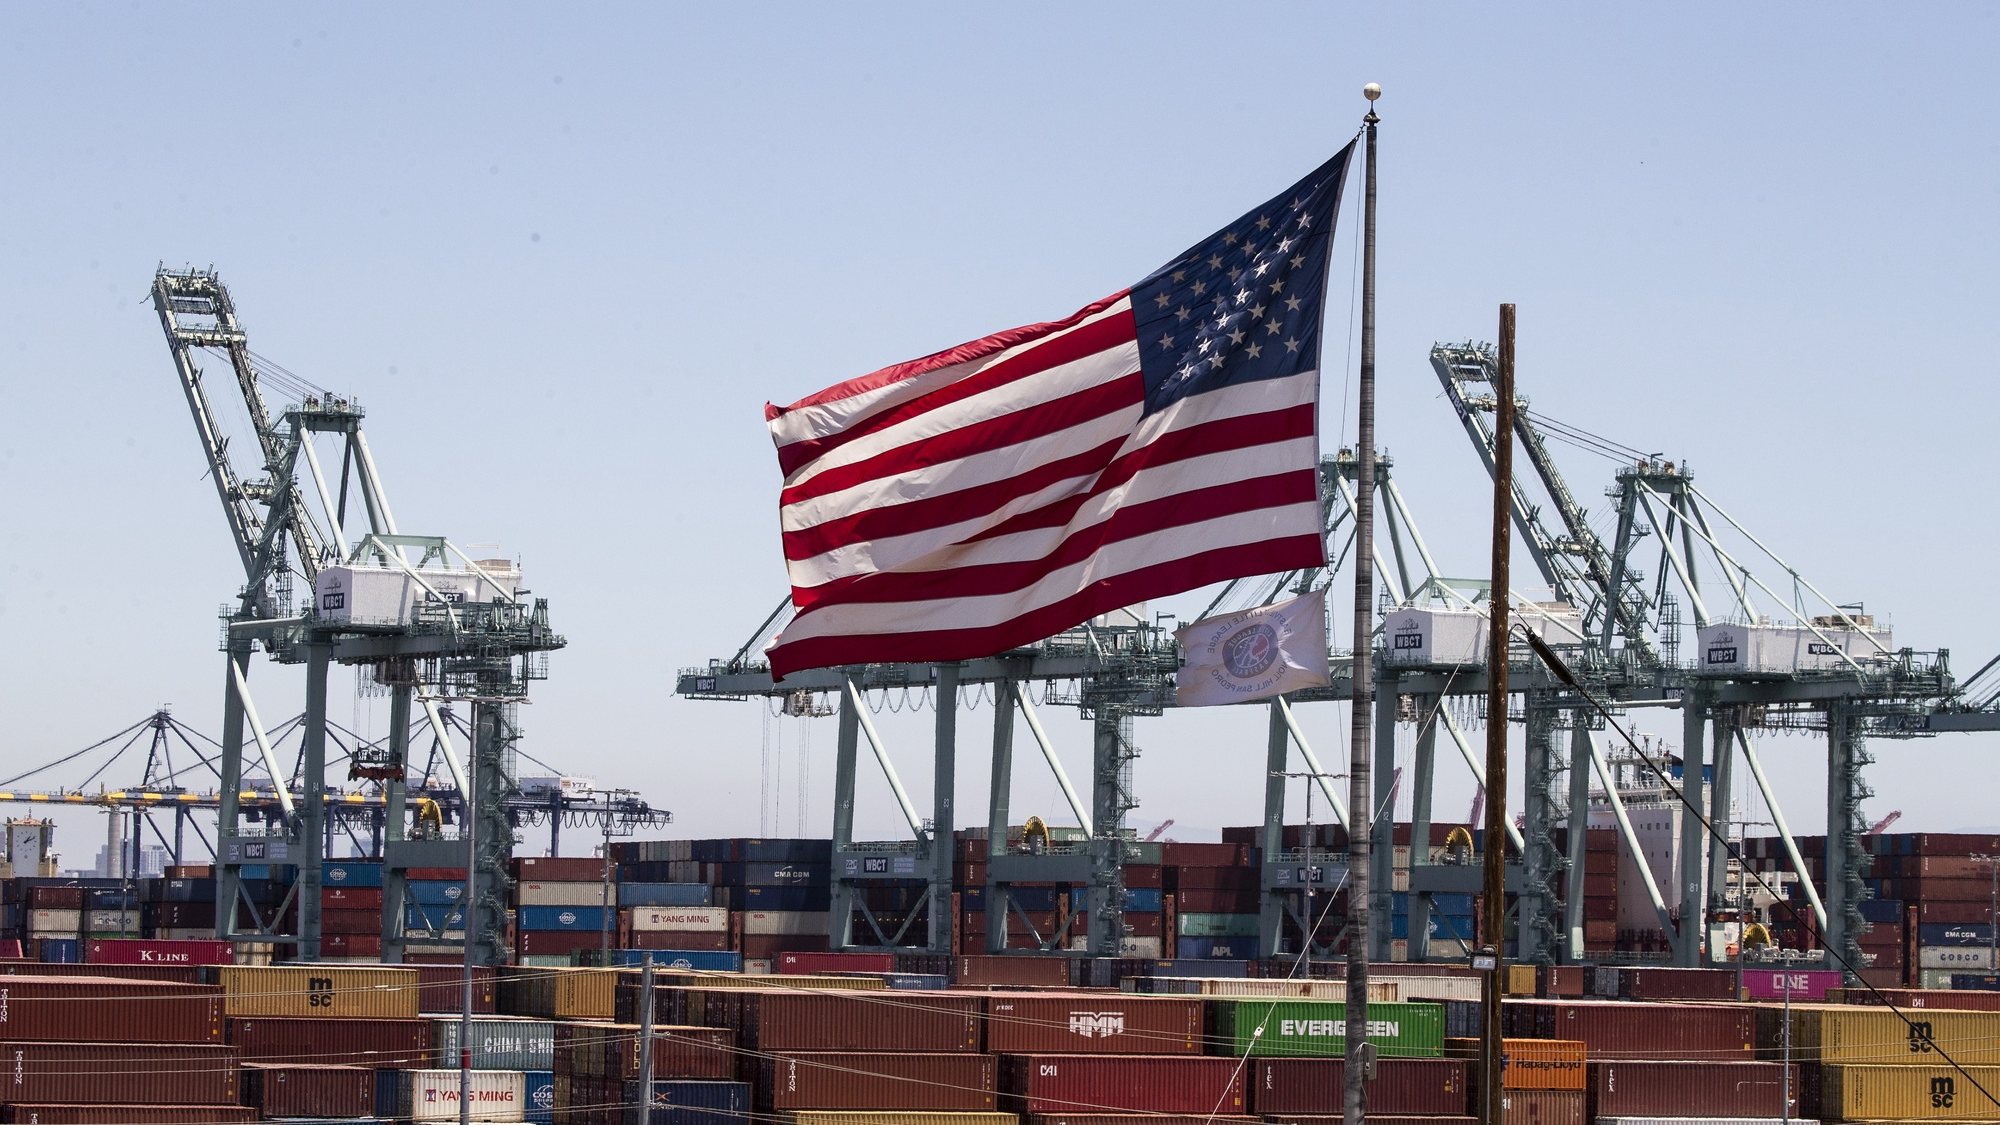 epa10058234 The US flag towers above hundreds of containers the Port of Los Angeles, California, USA, 07 July 2022. The first wave of the previous administration&#039;s tariffs on imports of Chinese goods began four years ago, and the US President is weighing options to continue the tariffs, according to reports. The tariffs imposed on China include a broad range of items; including steel and aluminum products, semiconductors, aircraft parts, motorcycles, fabric, furniture, clothing and more.  EPA/ETIENNE LAURENT